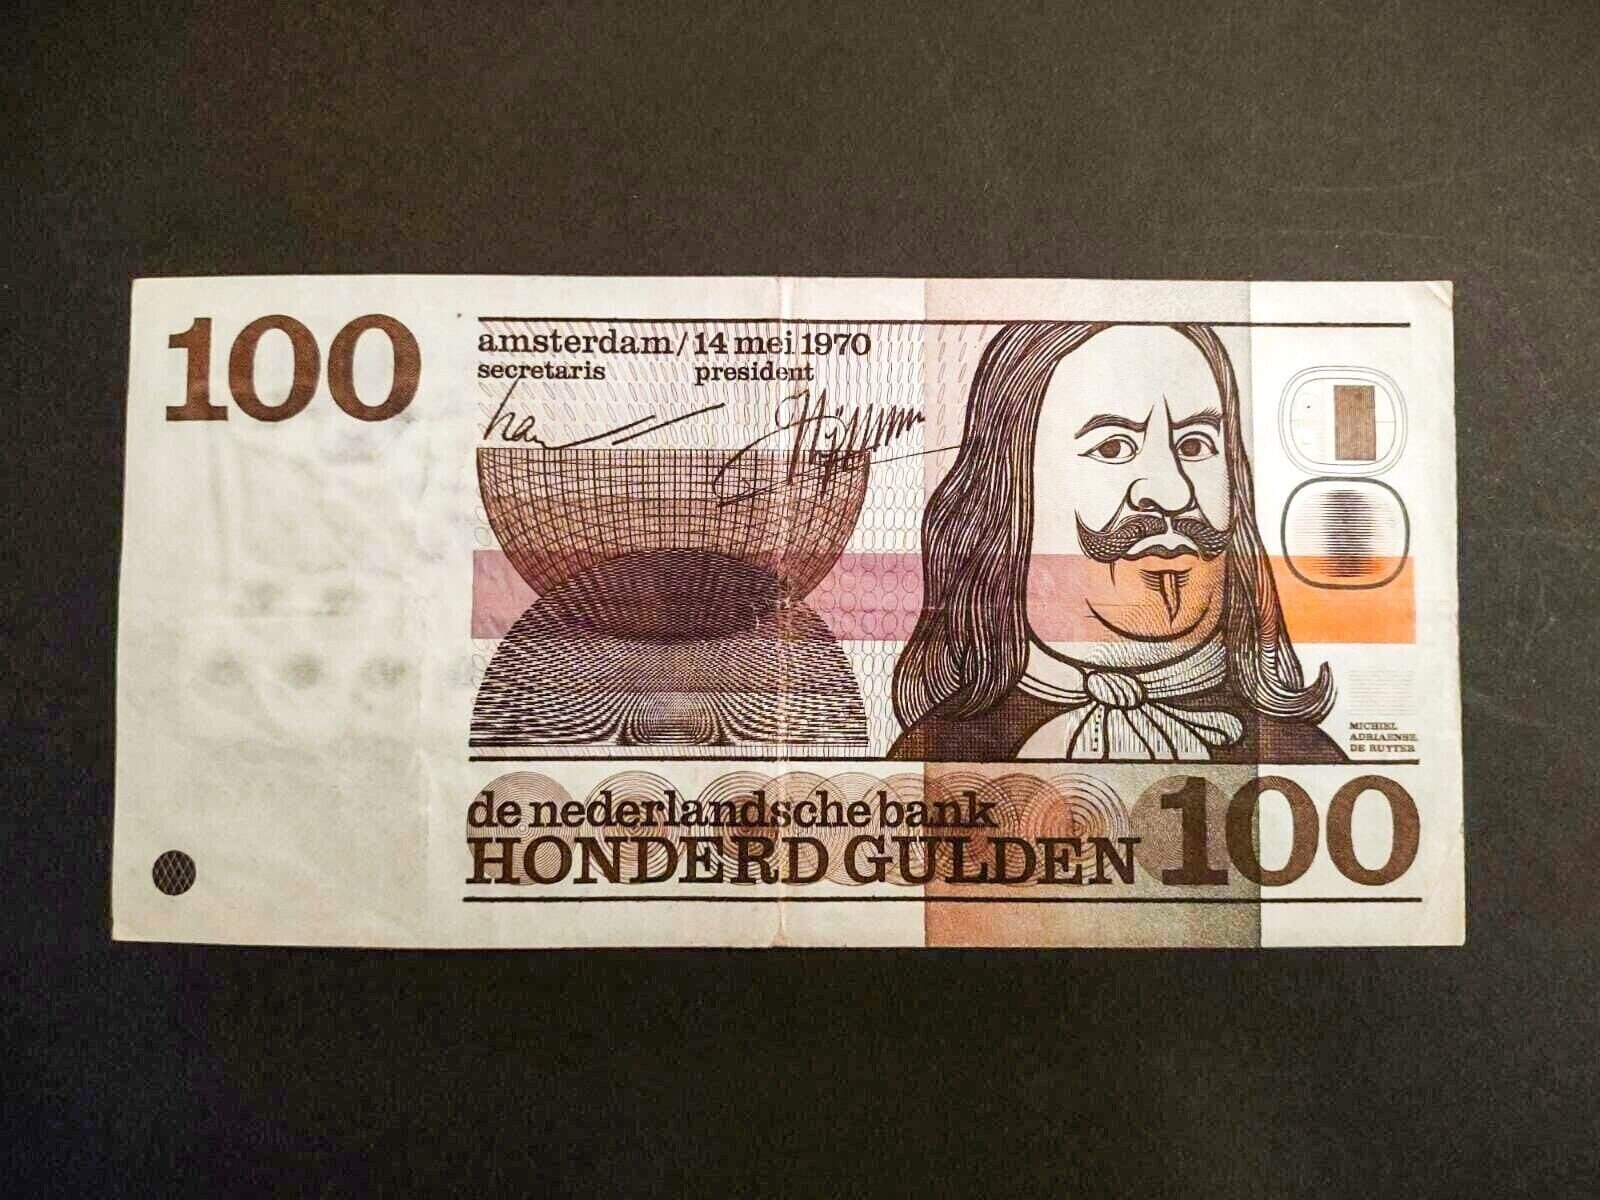 Primary image for Banknote 100 guilders 'Michiel de Ruyter', 1970